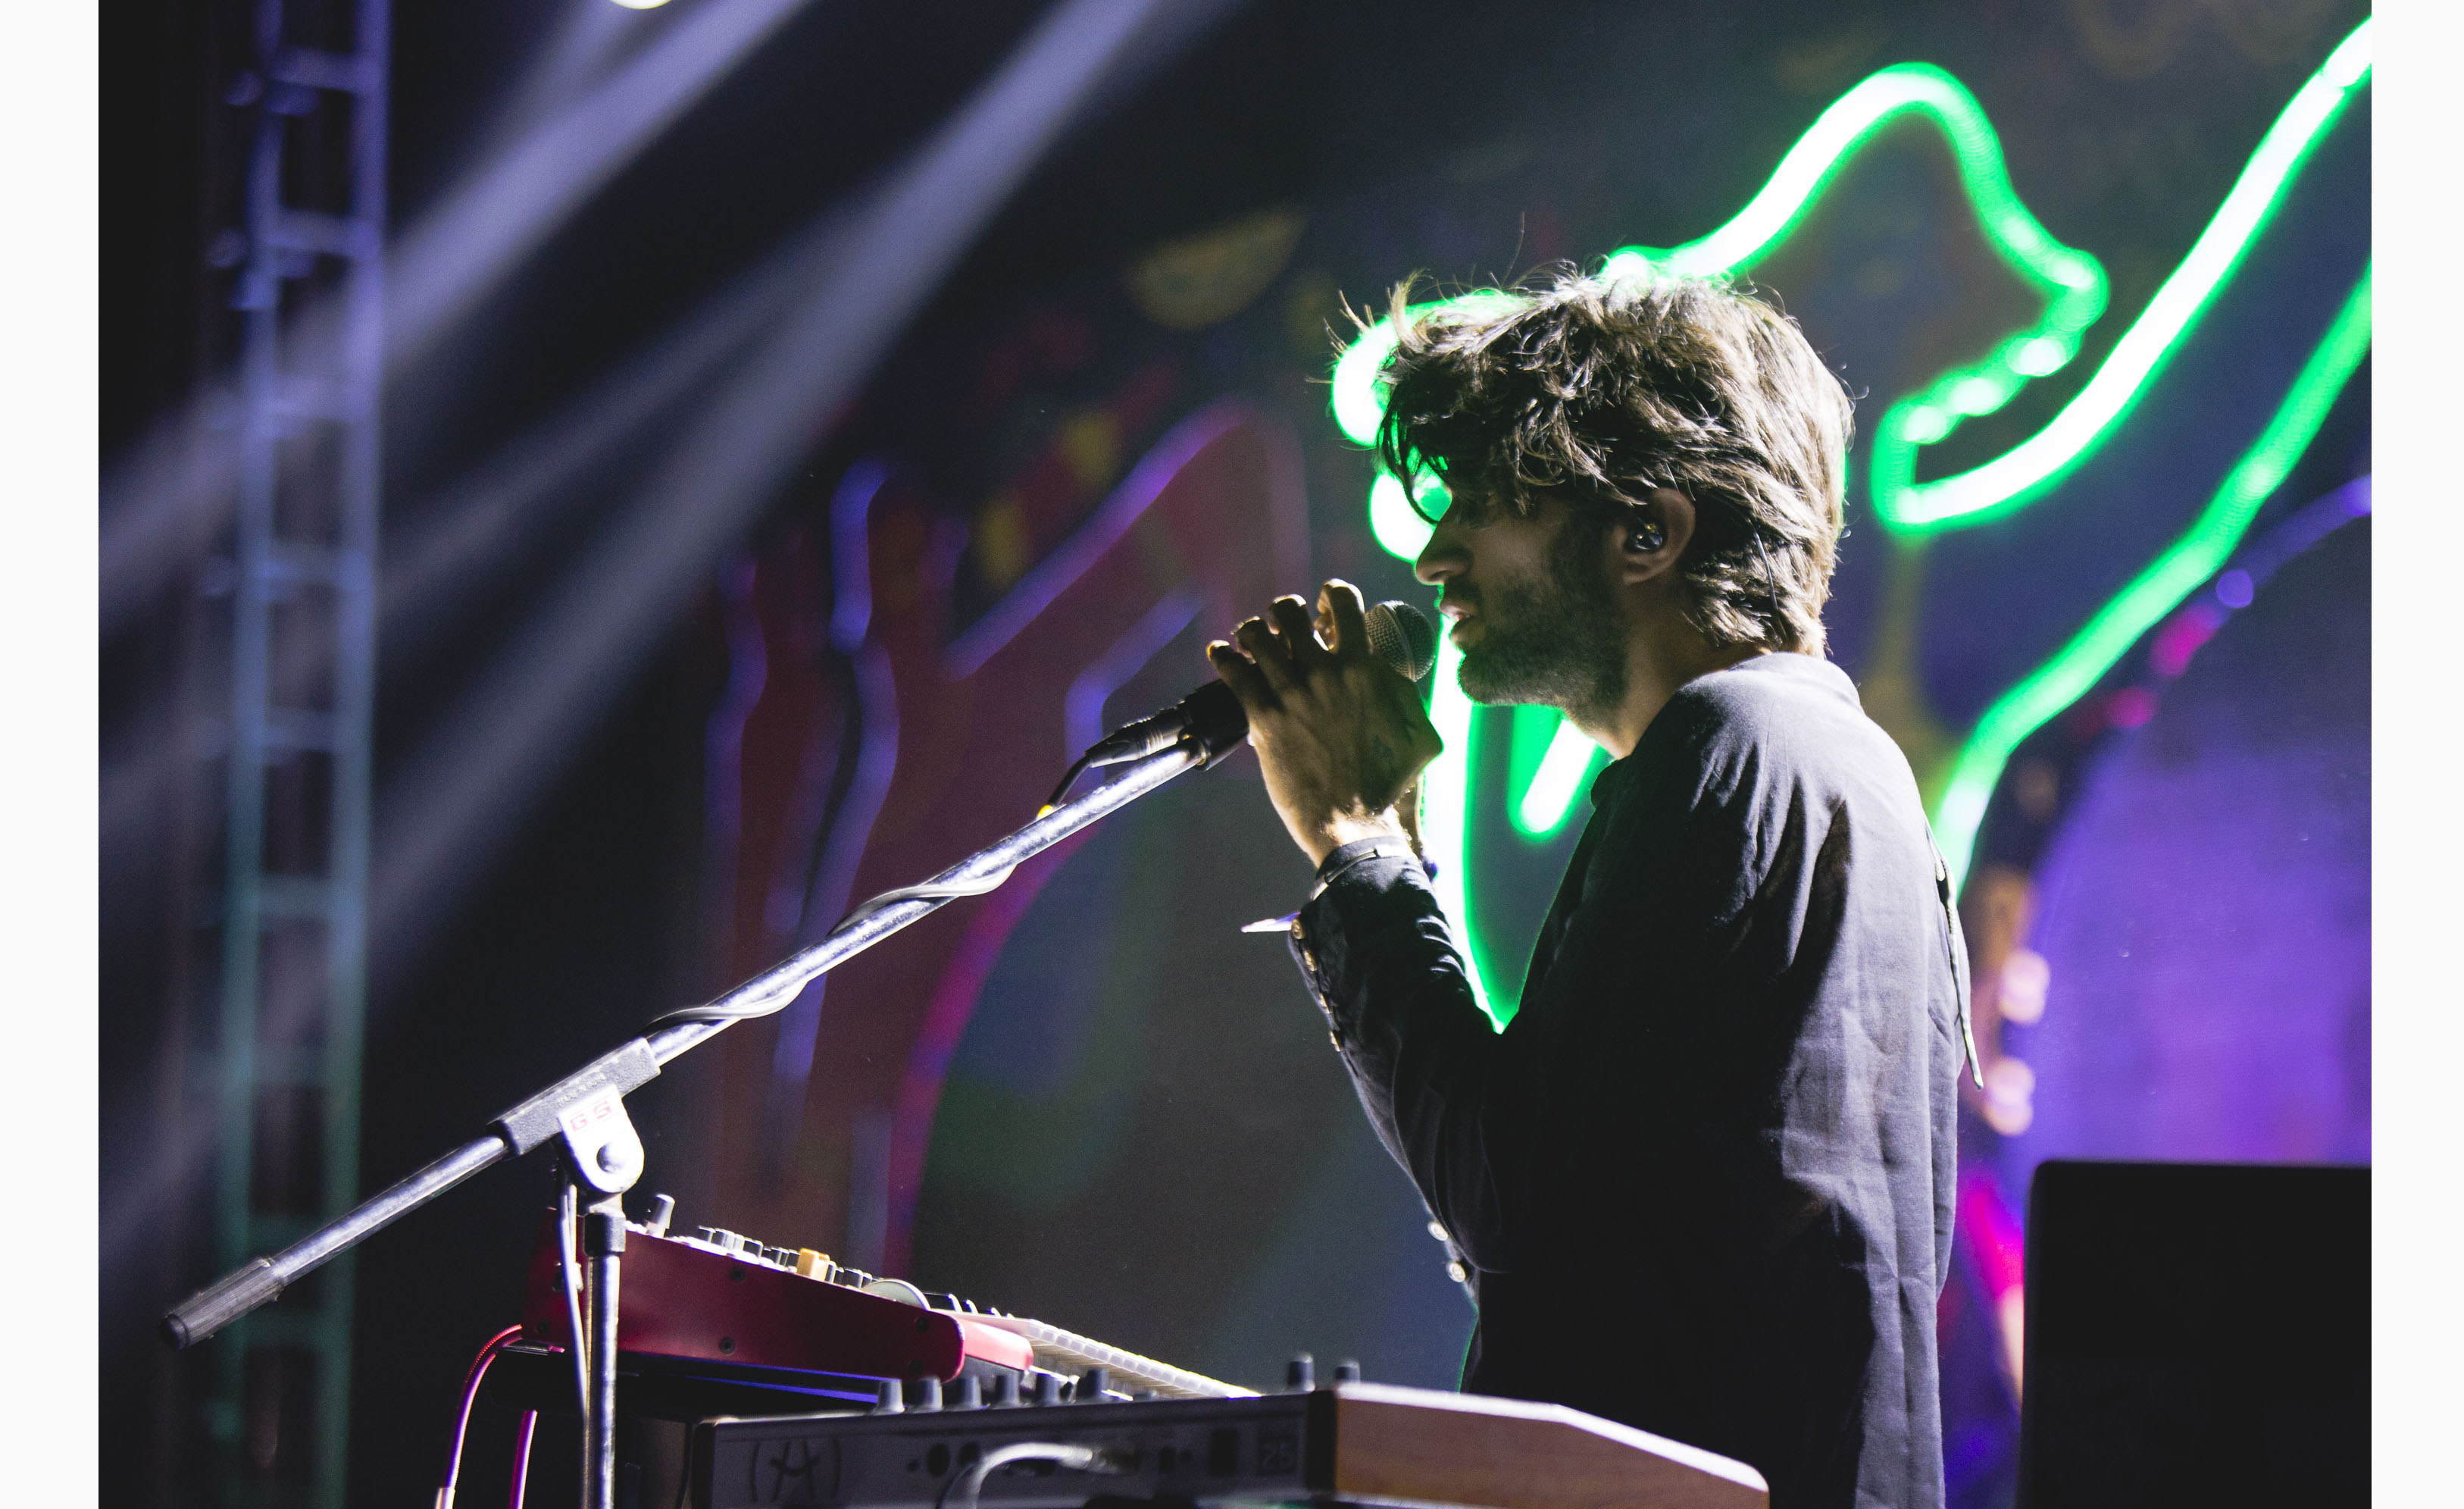 Nicholson performing on Day One of the Pune edition of BACARDI NH7 Weekender. Photo Credit - Parizad D